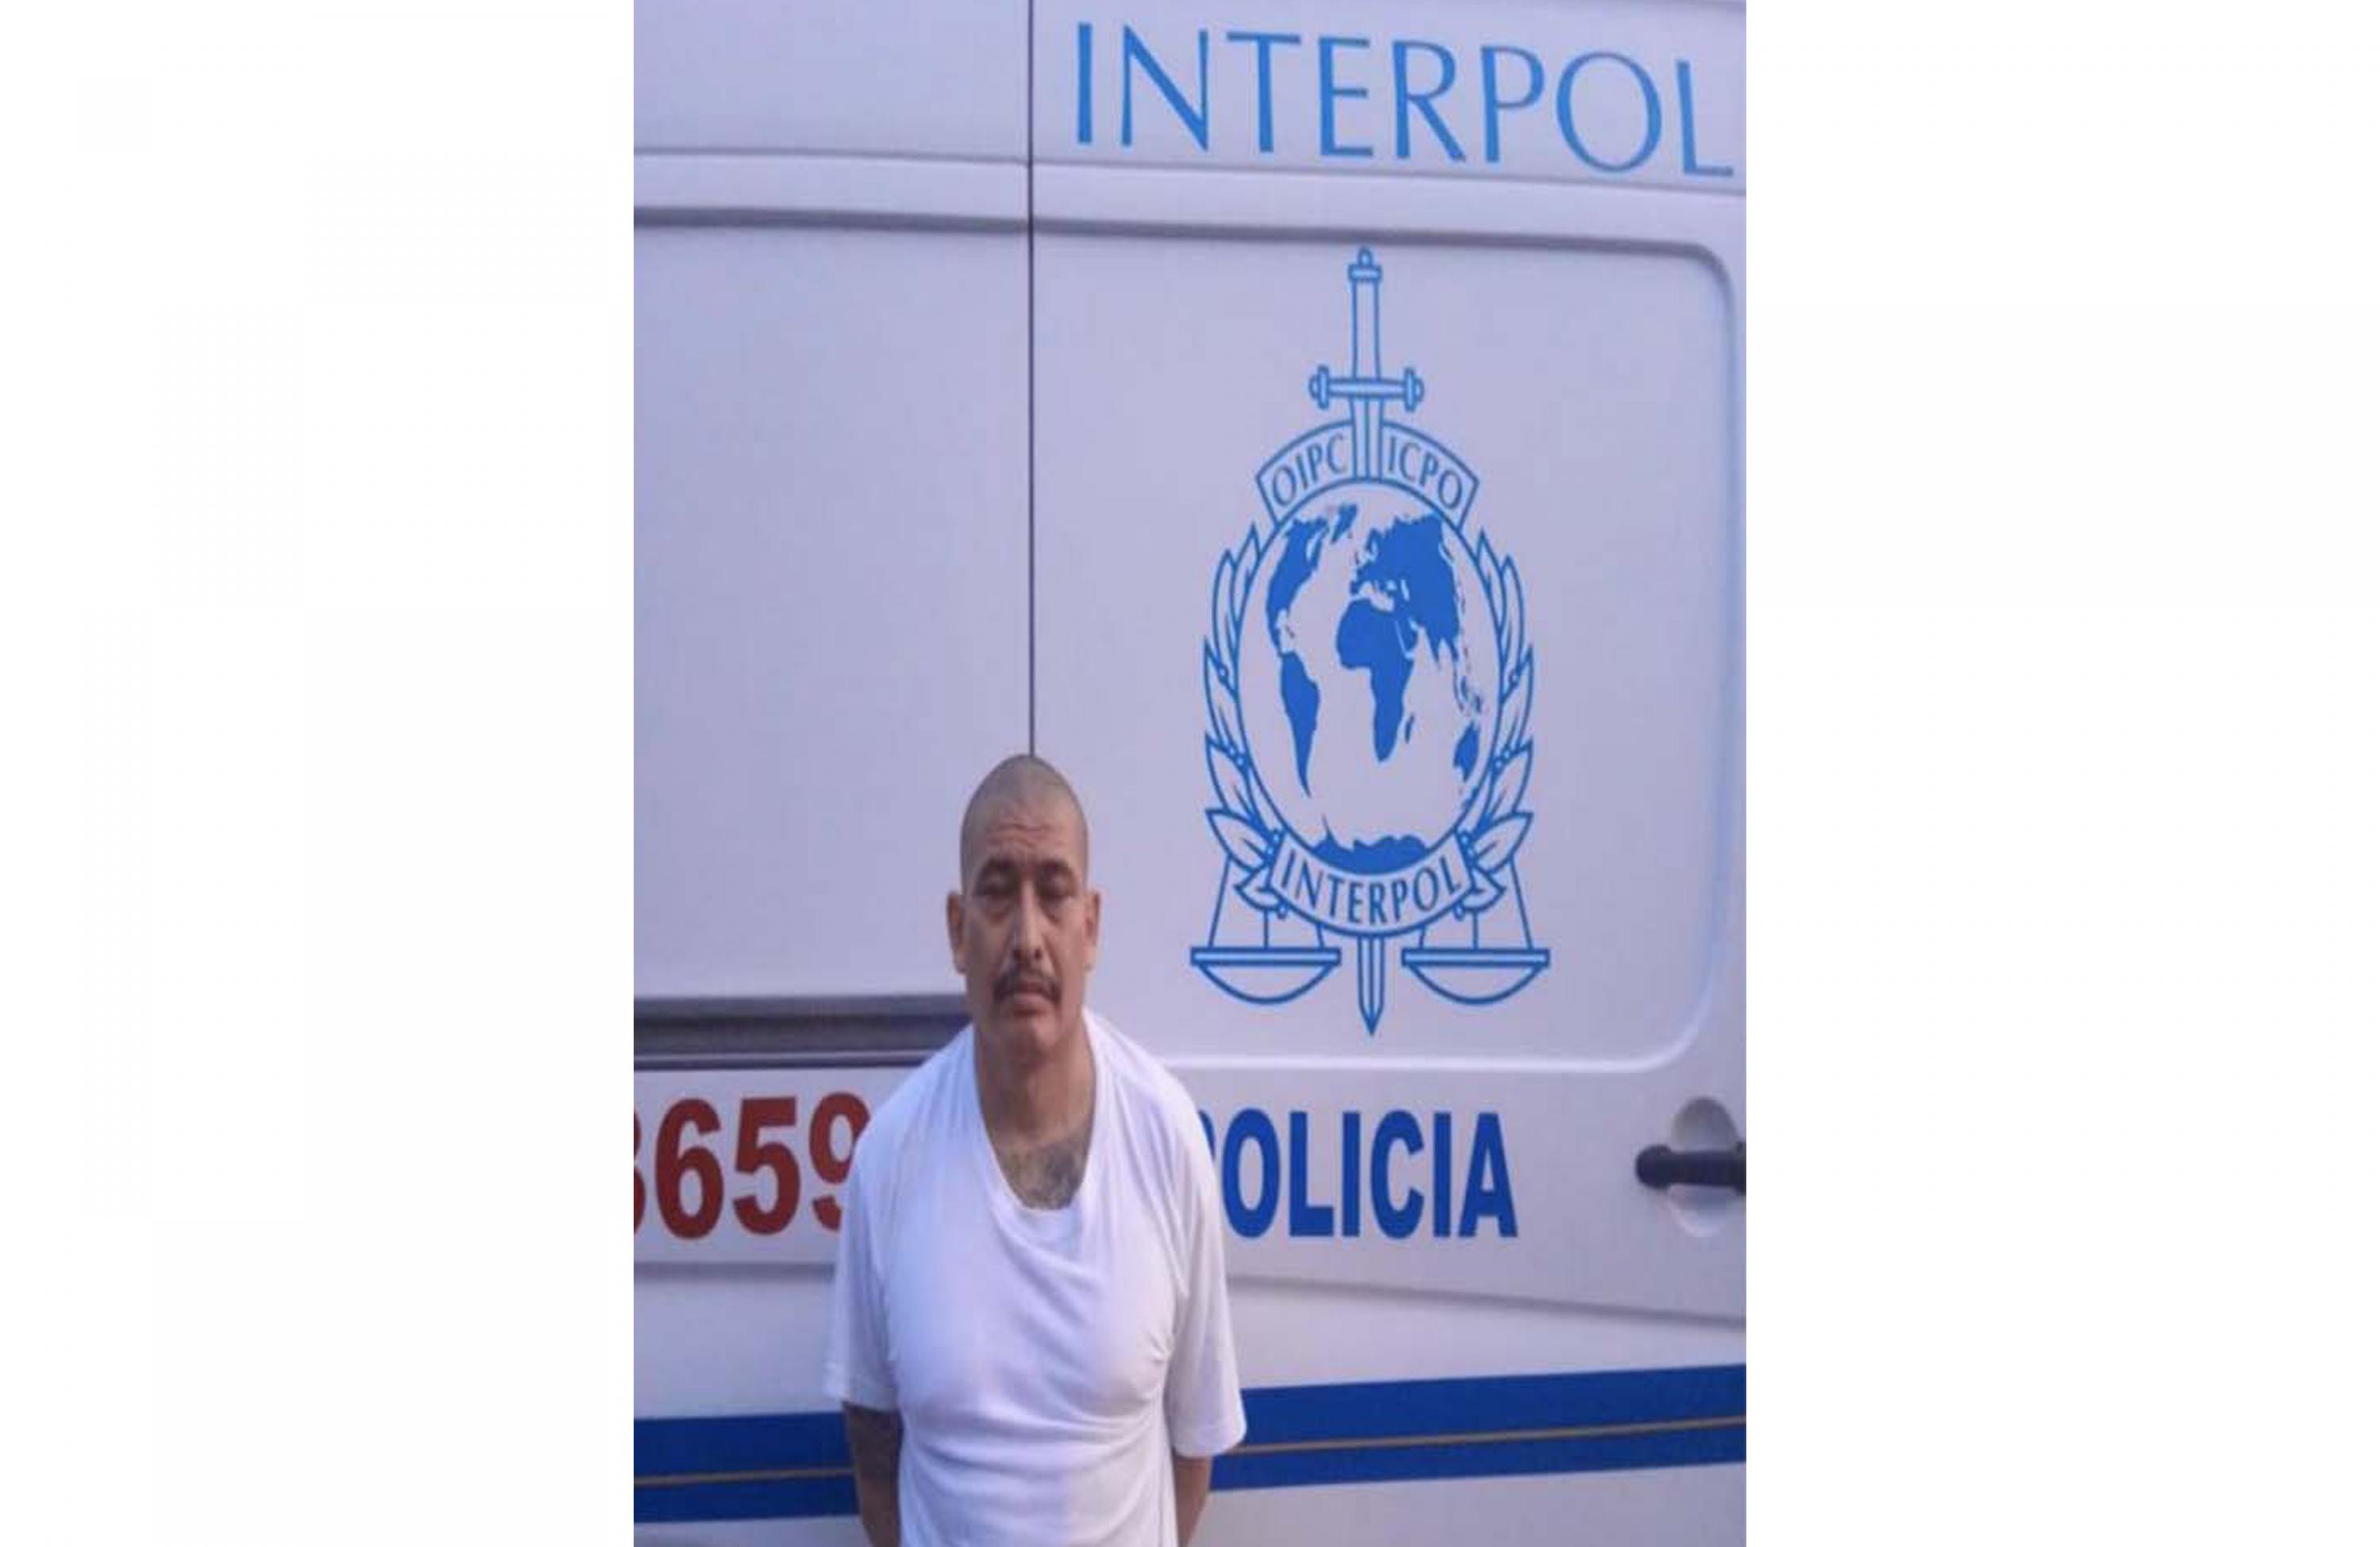 Image of Élmer Canales-Rivera, Crook, on June 3, 2021 at the maximum security prison in Zacatecoluca, El Salvador, when he was notified of his search warrants in the United States.